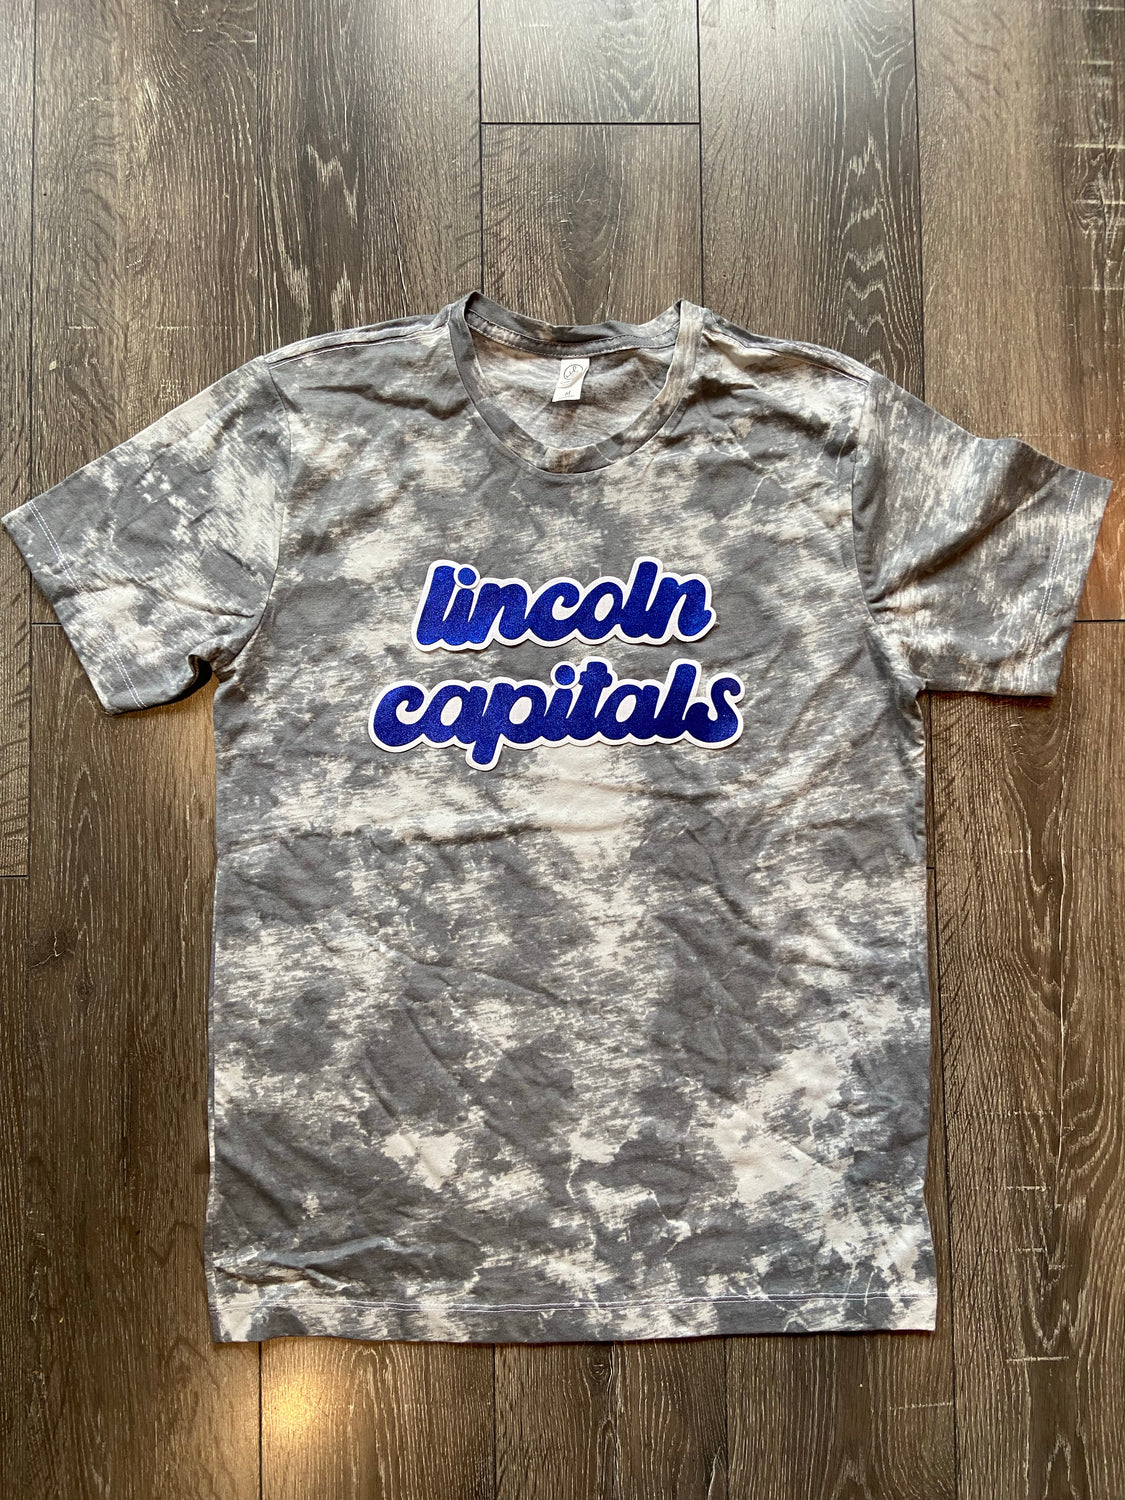 LINCOLN CAPITALS - GREY DYED TEE